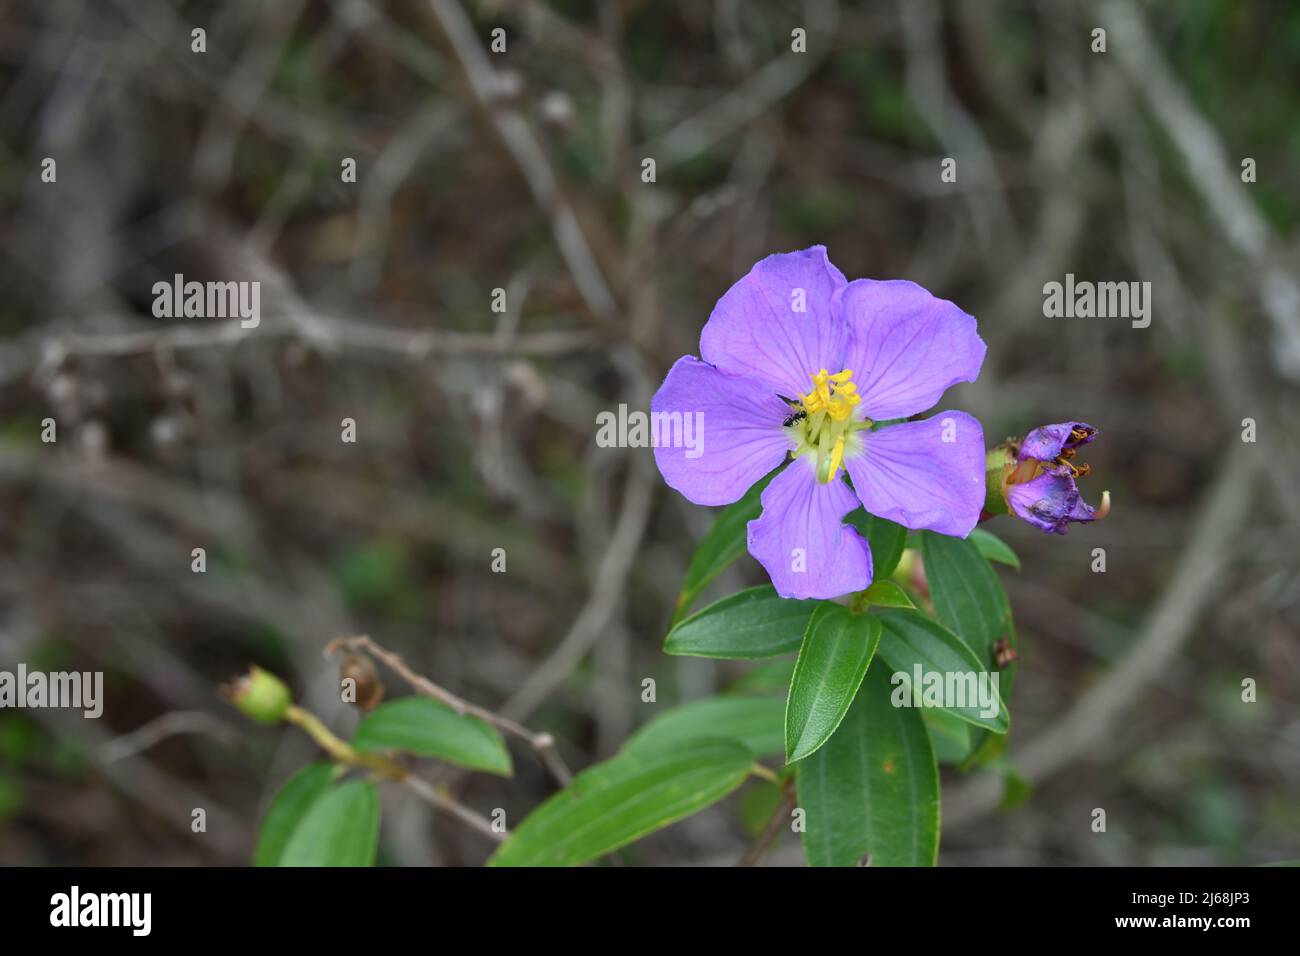 Close up of a purple Eight stamen Osbeckia plant branch with bloom and dead flowers with a black ant on pollen Stock Photo